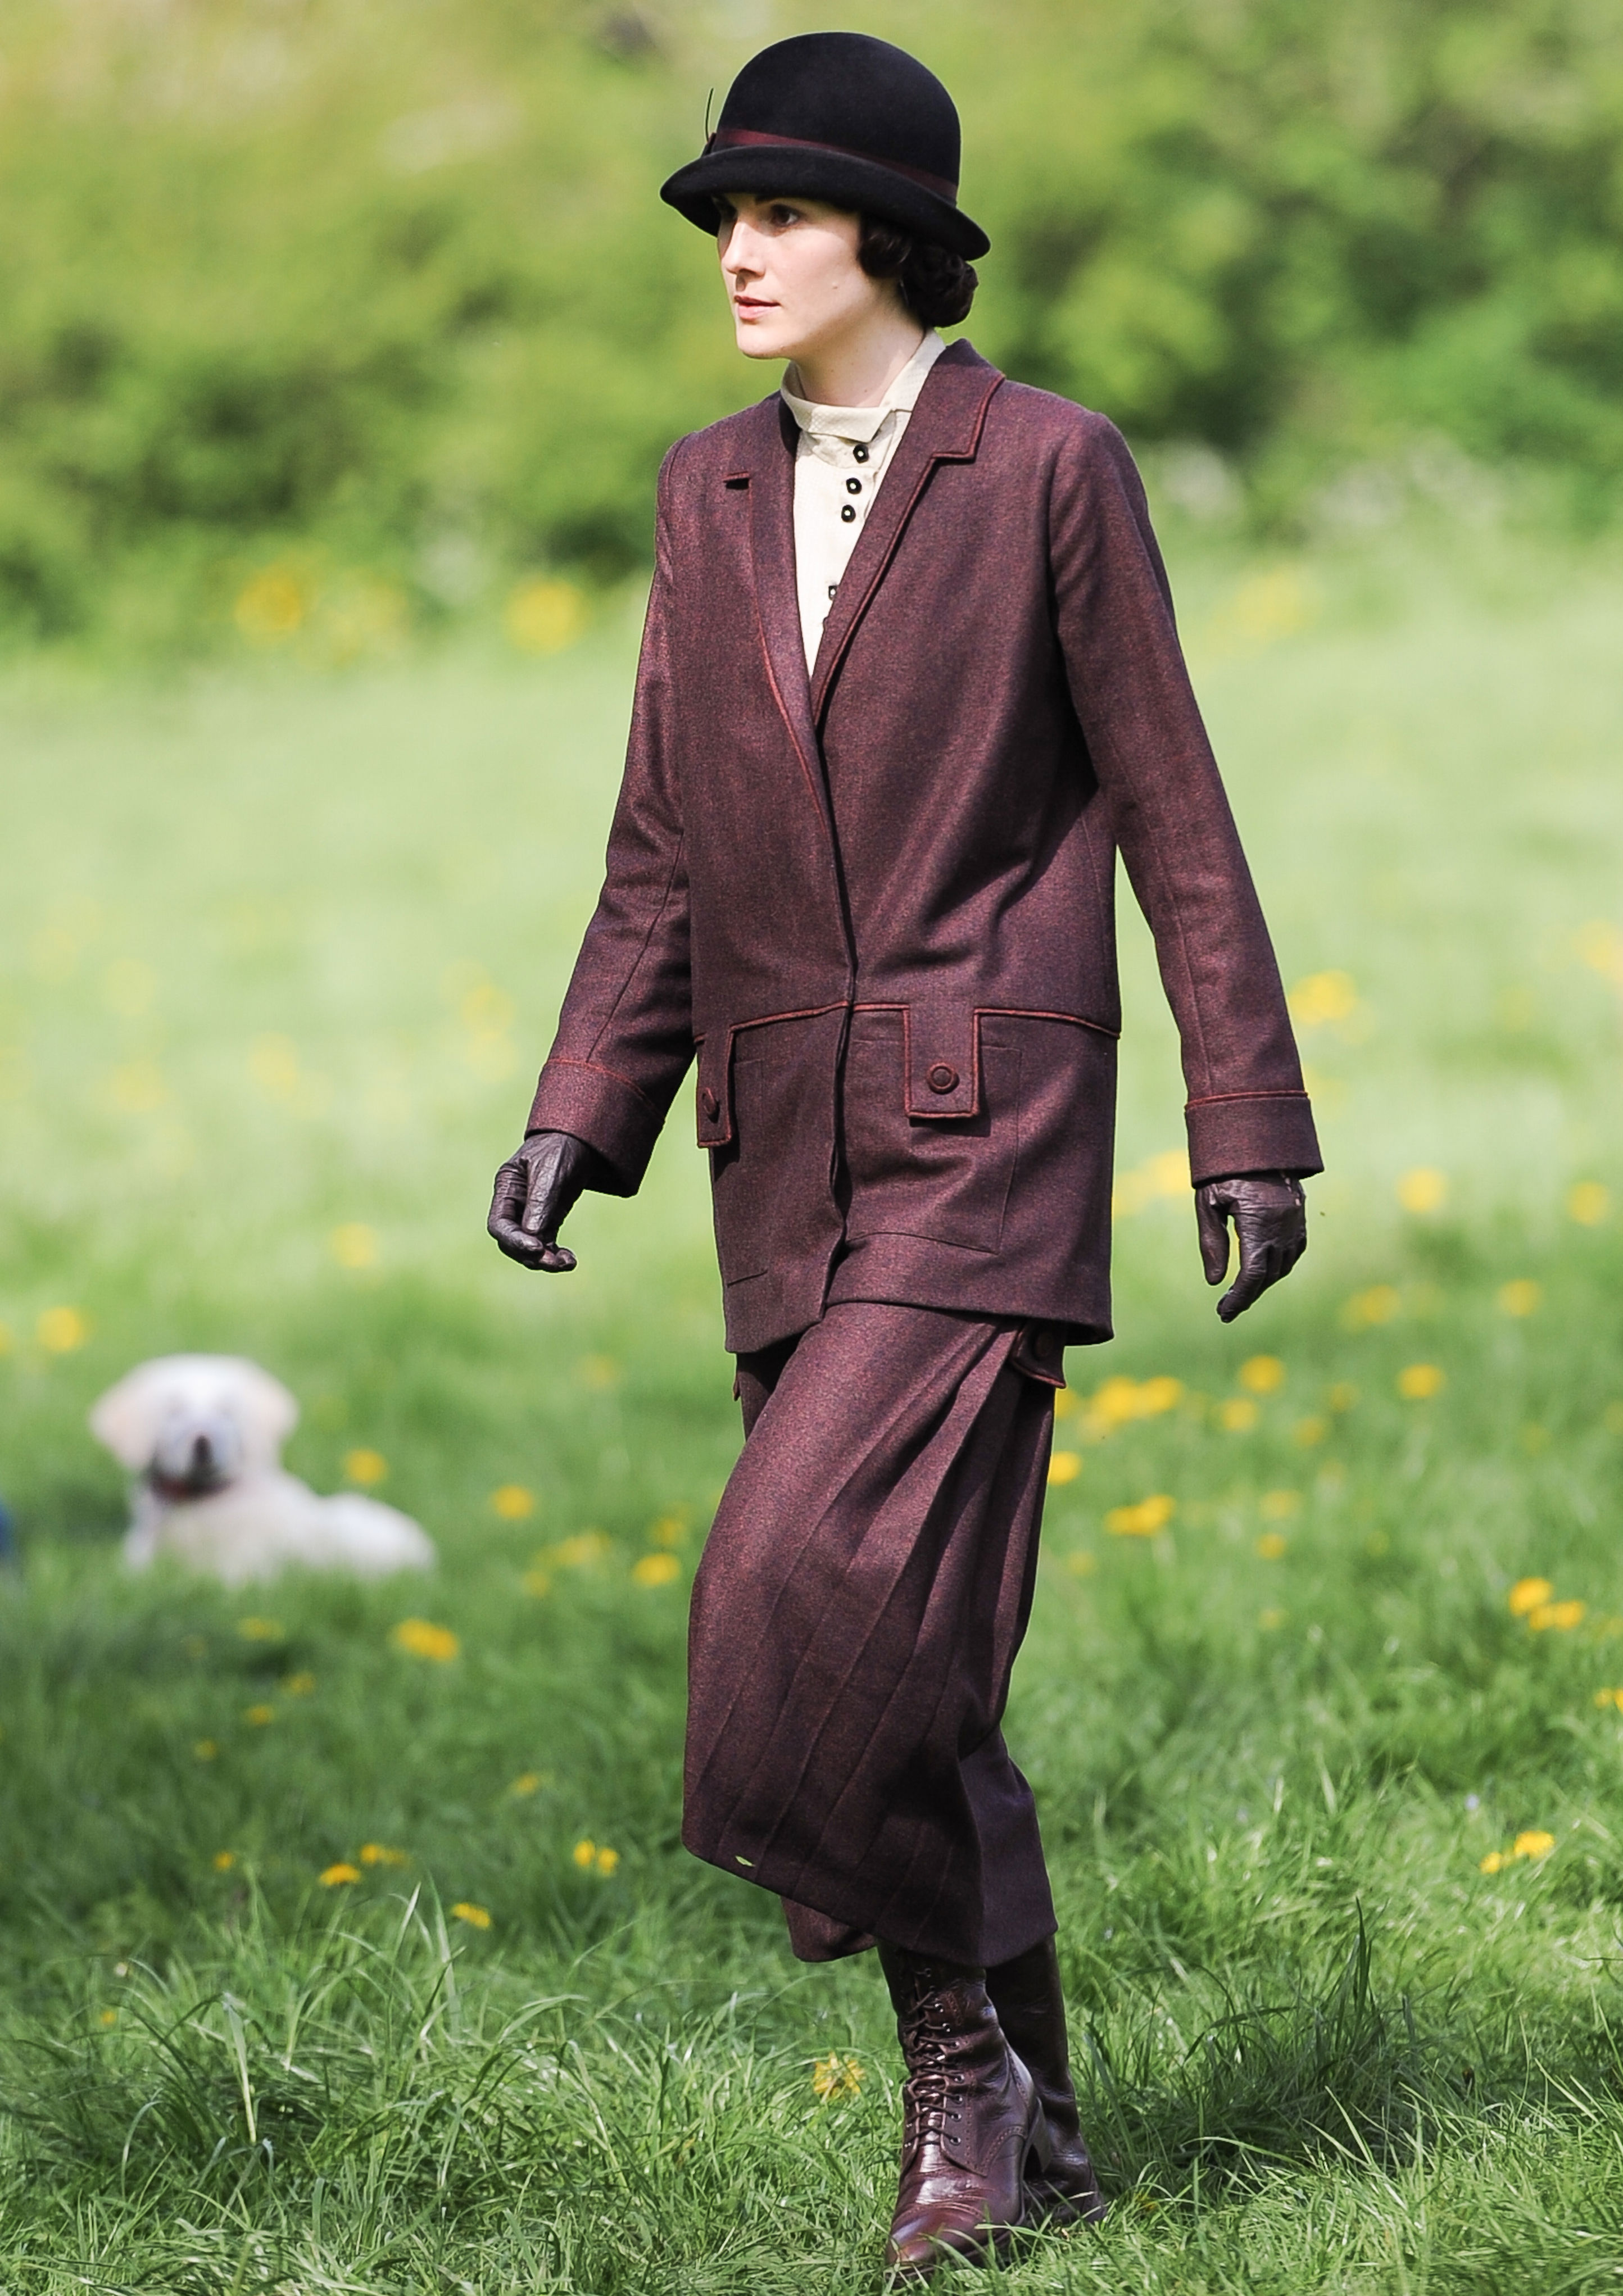 <p><a href="https://www.wonderwall.com/celebrity/profiles/overview/michelle-dockery-1488.article">Michelle Dockery</a> is seen here filming season 5 of "Downton Abbey" in Oxfordshire, England, in 2014 wearing a rich merlot suit with a matching hat, boots and gloves. "Her wardrobe is quite linear and androgynous. I studied lots of fashion plates and men's tailoring from the period, which inspired some of the more structured outfits she wears when she's running the estate," costume designer Anna Mary Scott Robbins told <a href="https://www.vogue.co.uk/article/downton-abbey-film-costumes-anna-jones-interview">Vogue</a>. "She's a girl in a man's world, but she's doing it her way. Her color scheme tends to be quite bold -- deep burgundies and navy blues that would never suit the other characters."</p>